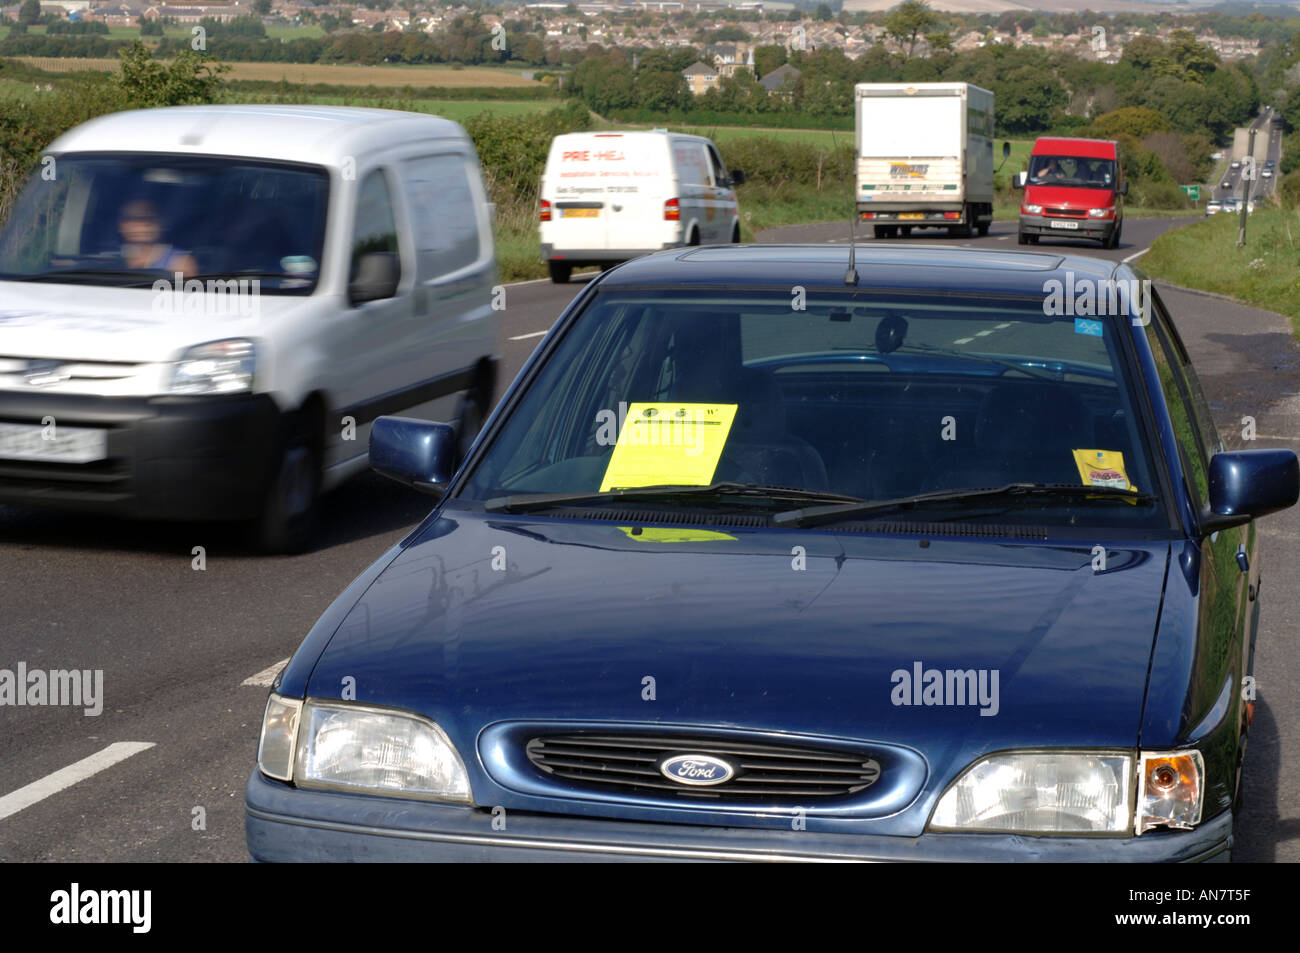 An abandoned car with a Police aware notice attached Stock Photo